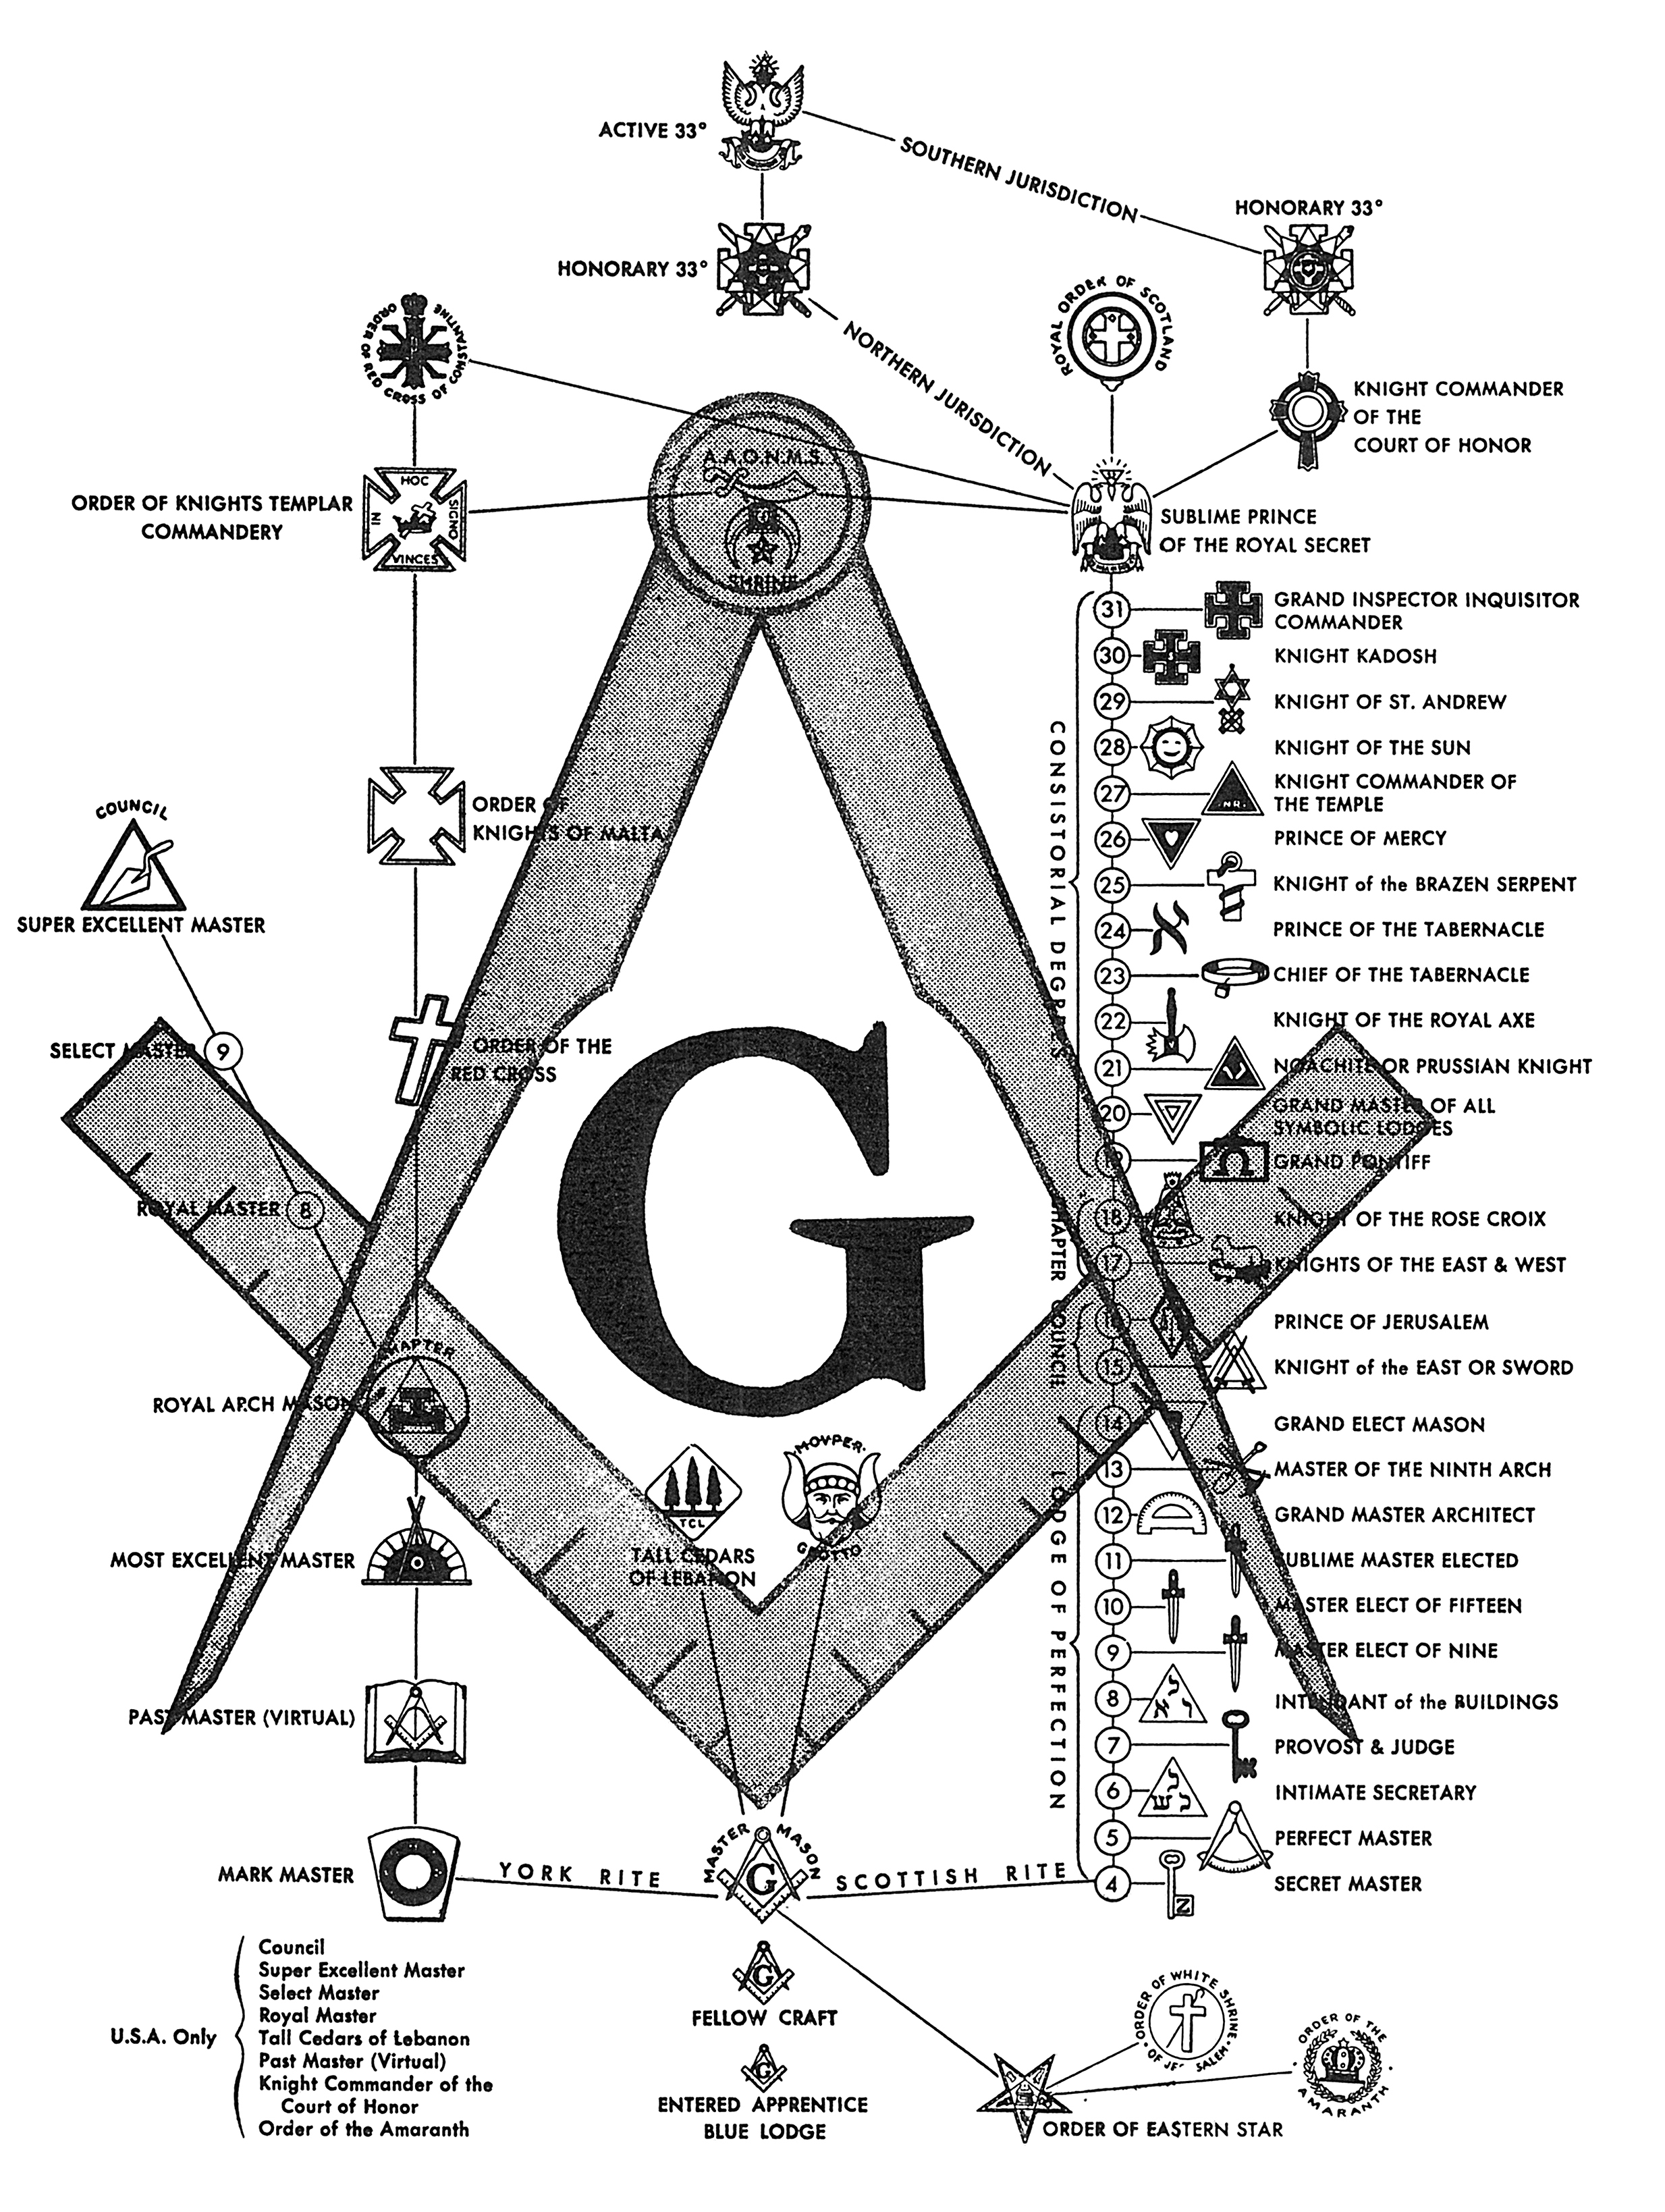 What is the meaning of g in masonic symbol